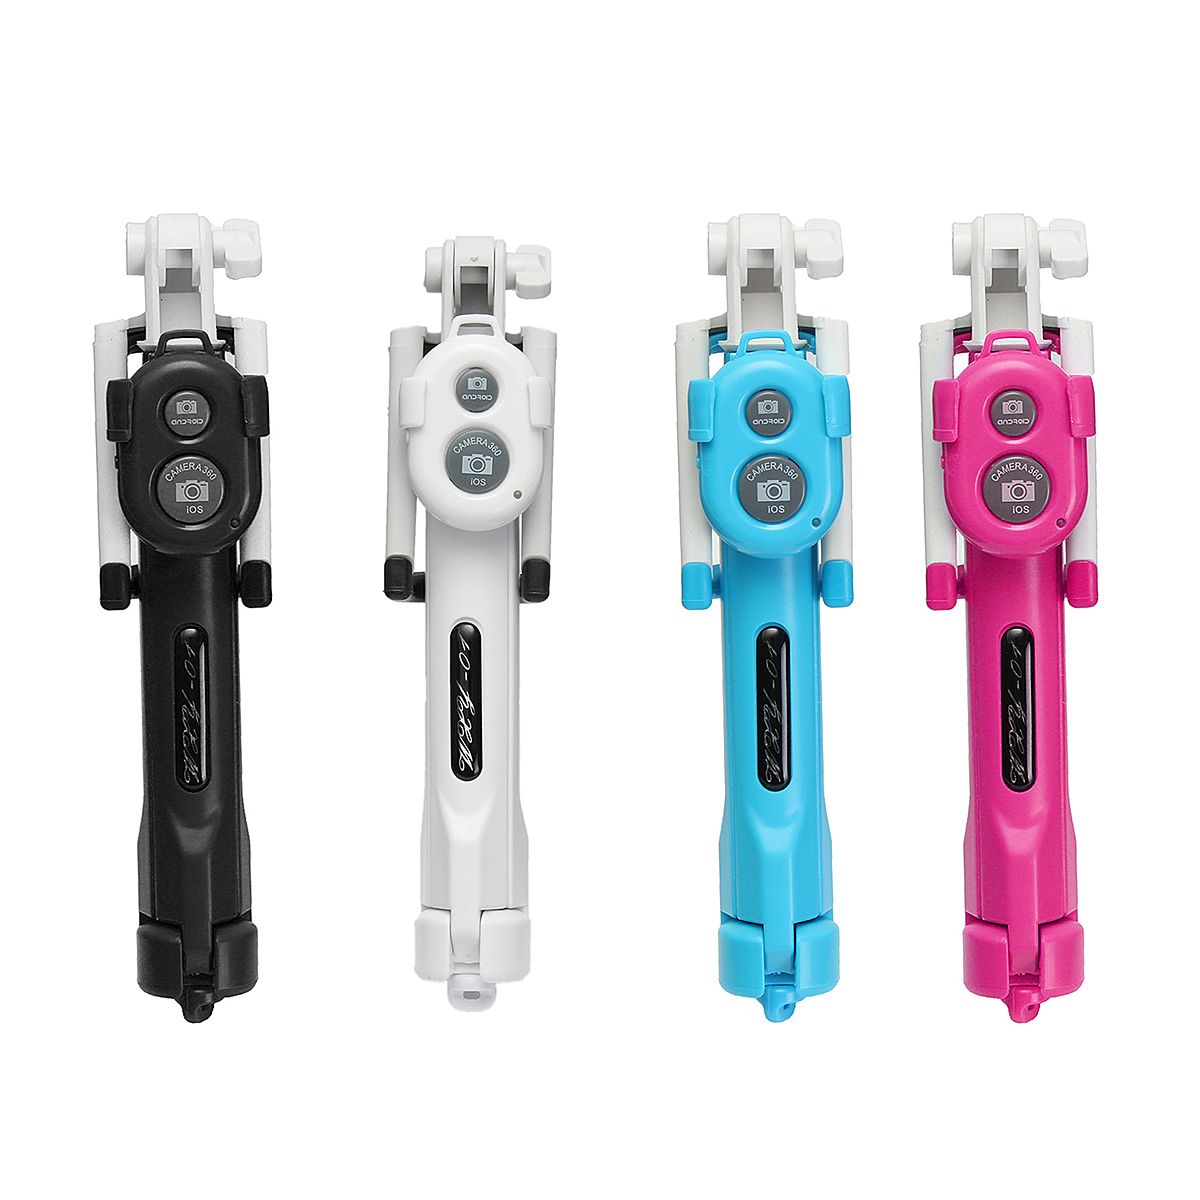 Remote-Control-Foldable-Unipod-Selfie-Stick-Portable-Handheld-Tripod-with-bluetooth-Shutter-For-Smar-1660701